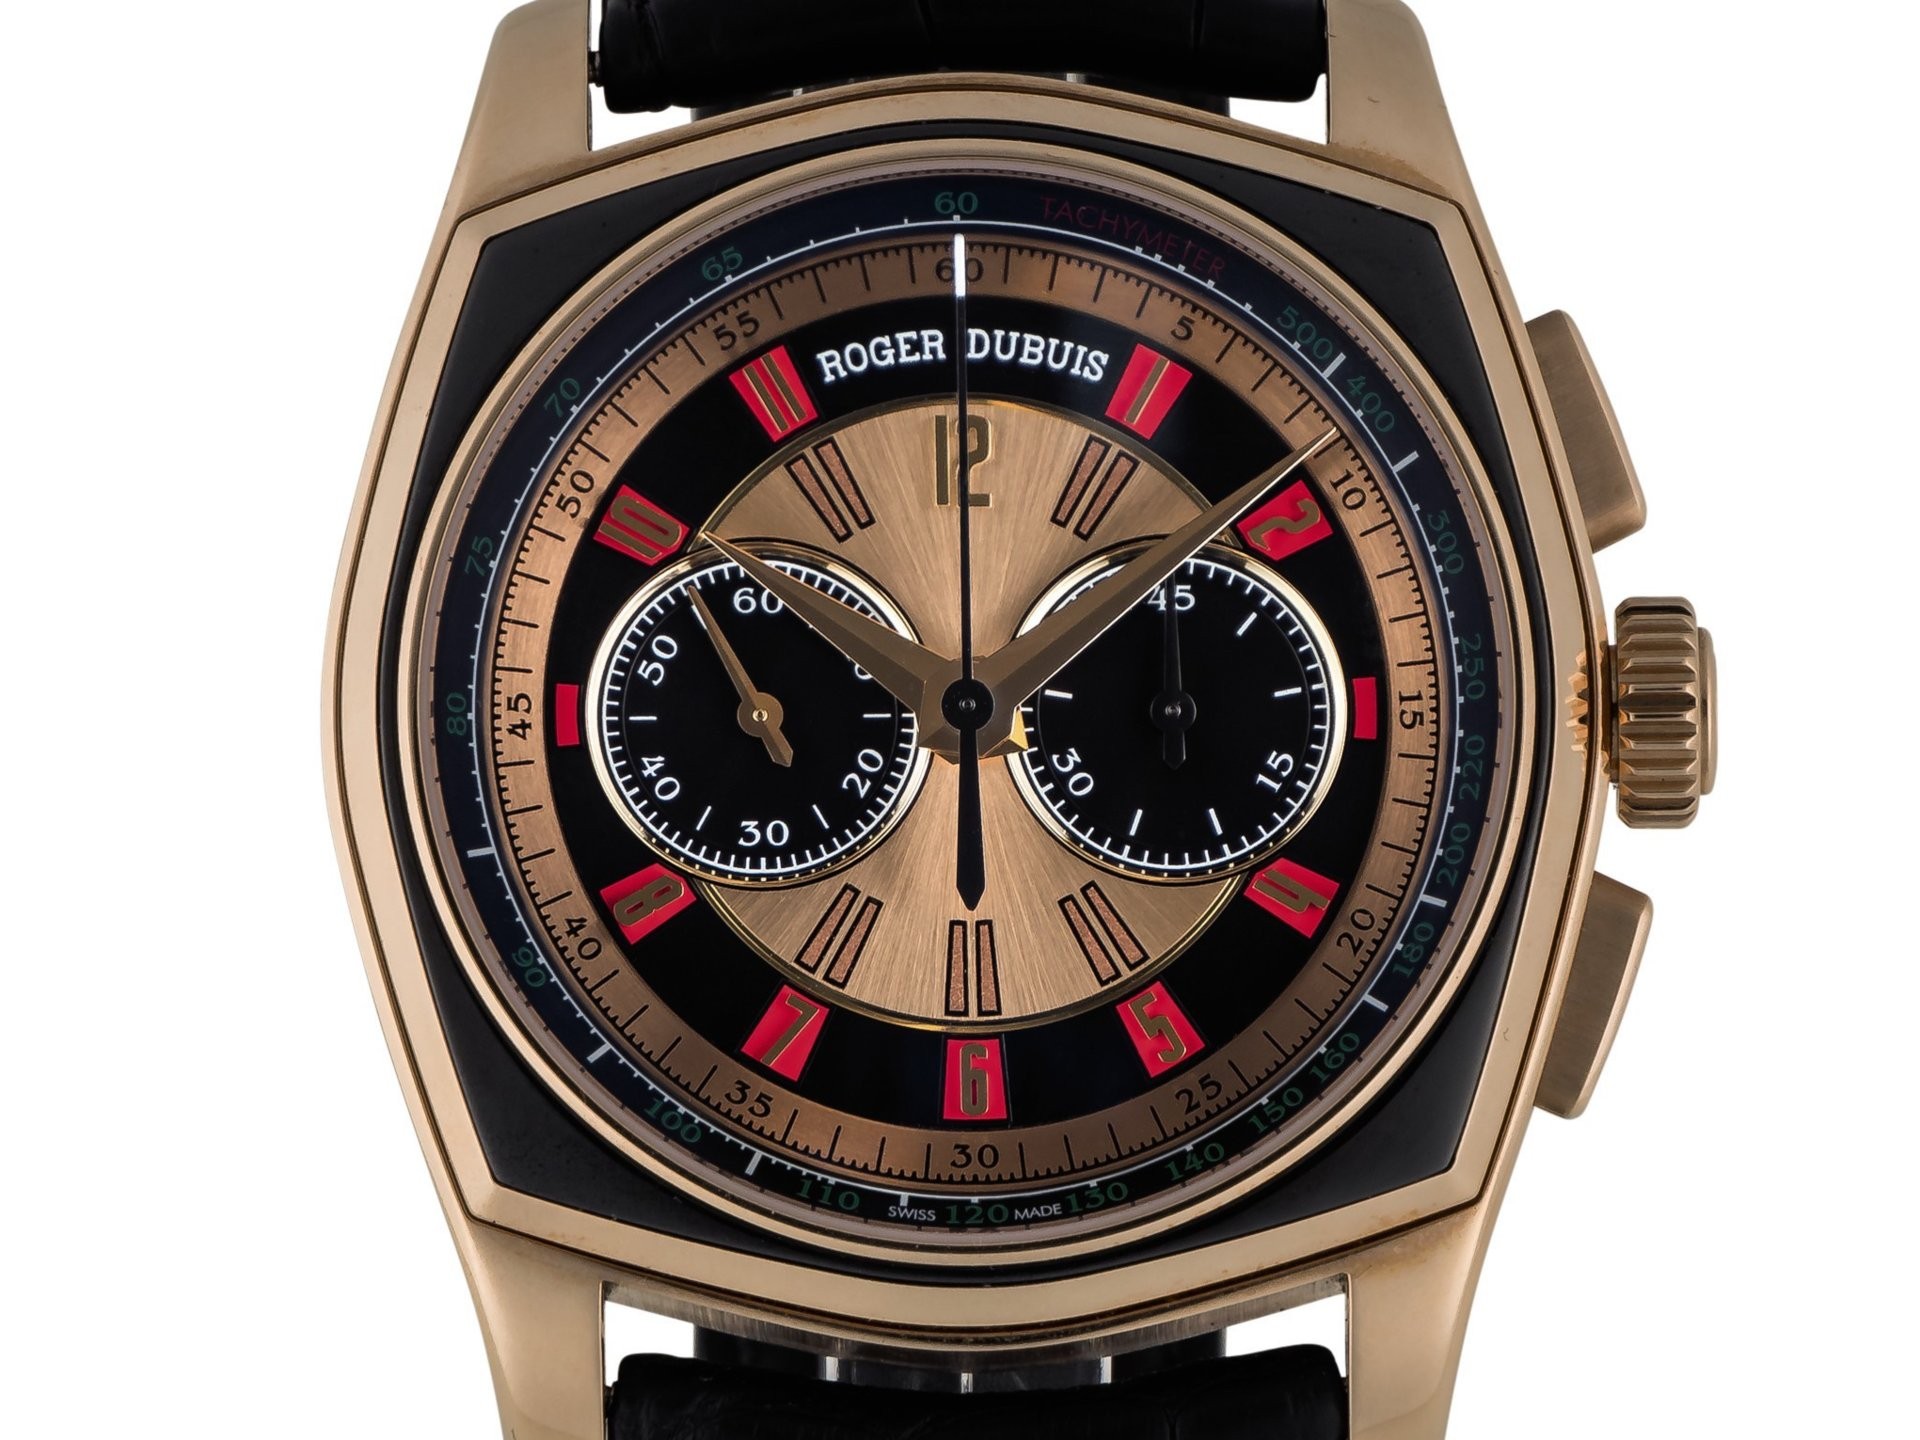 Sold watch. Часы Semi. Patek Philippe Stainless Steel. The most expensive watch Auction. Roger Dubuis logo vector.